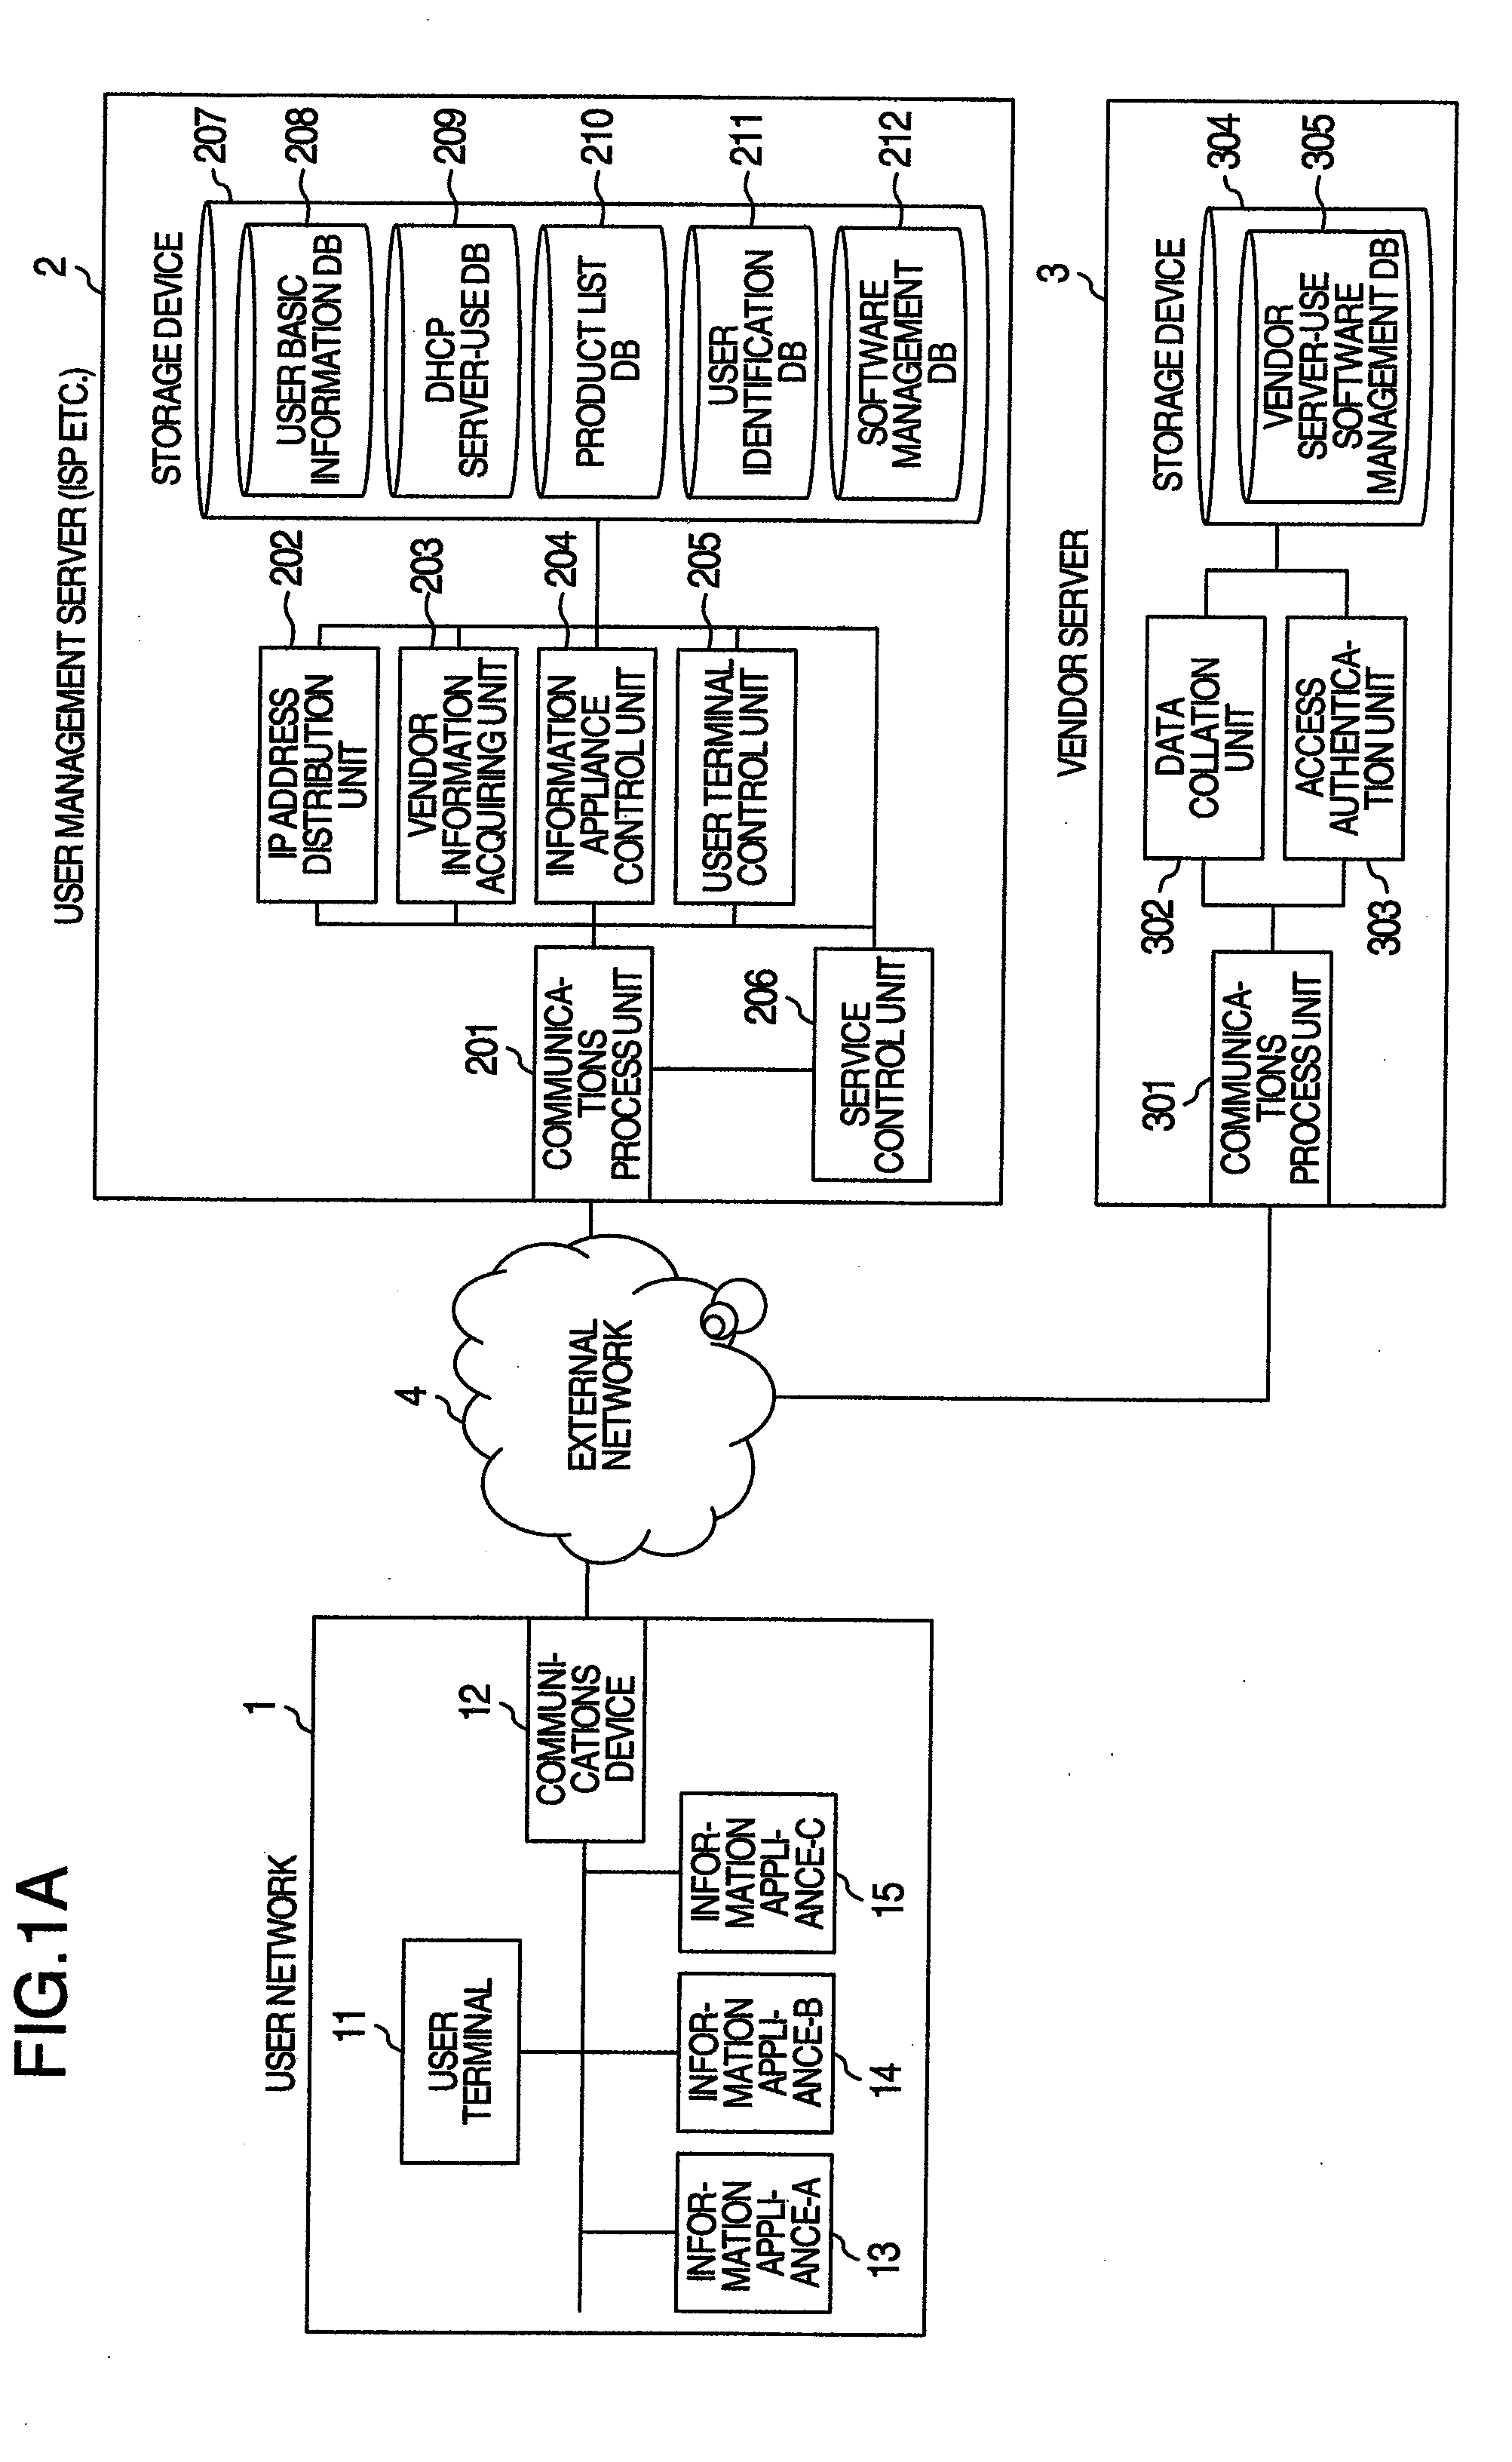 Software update system for information equipment